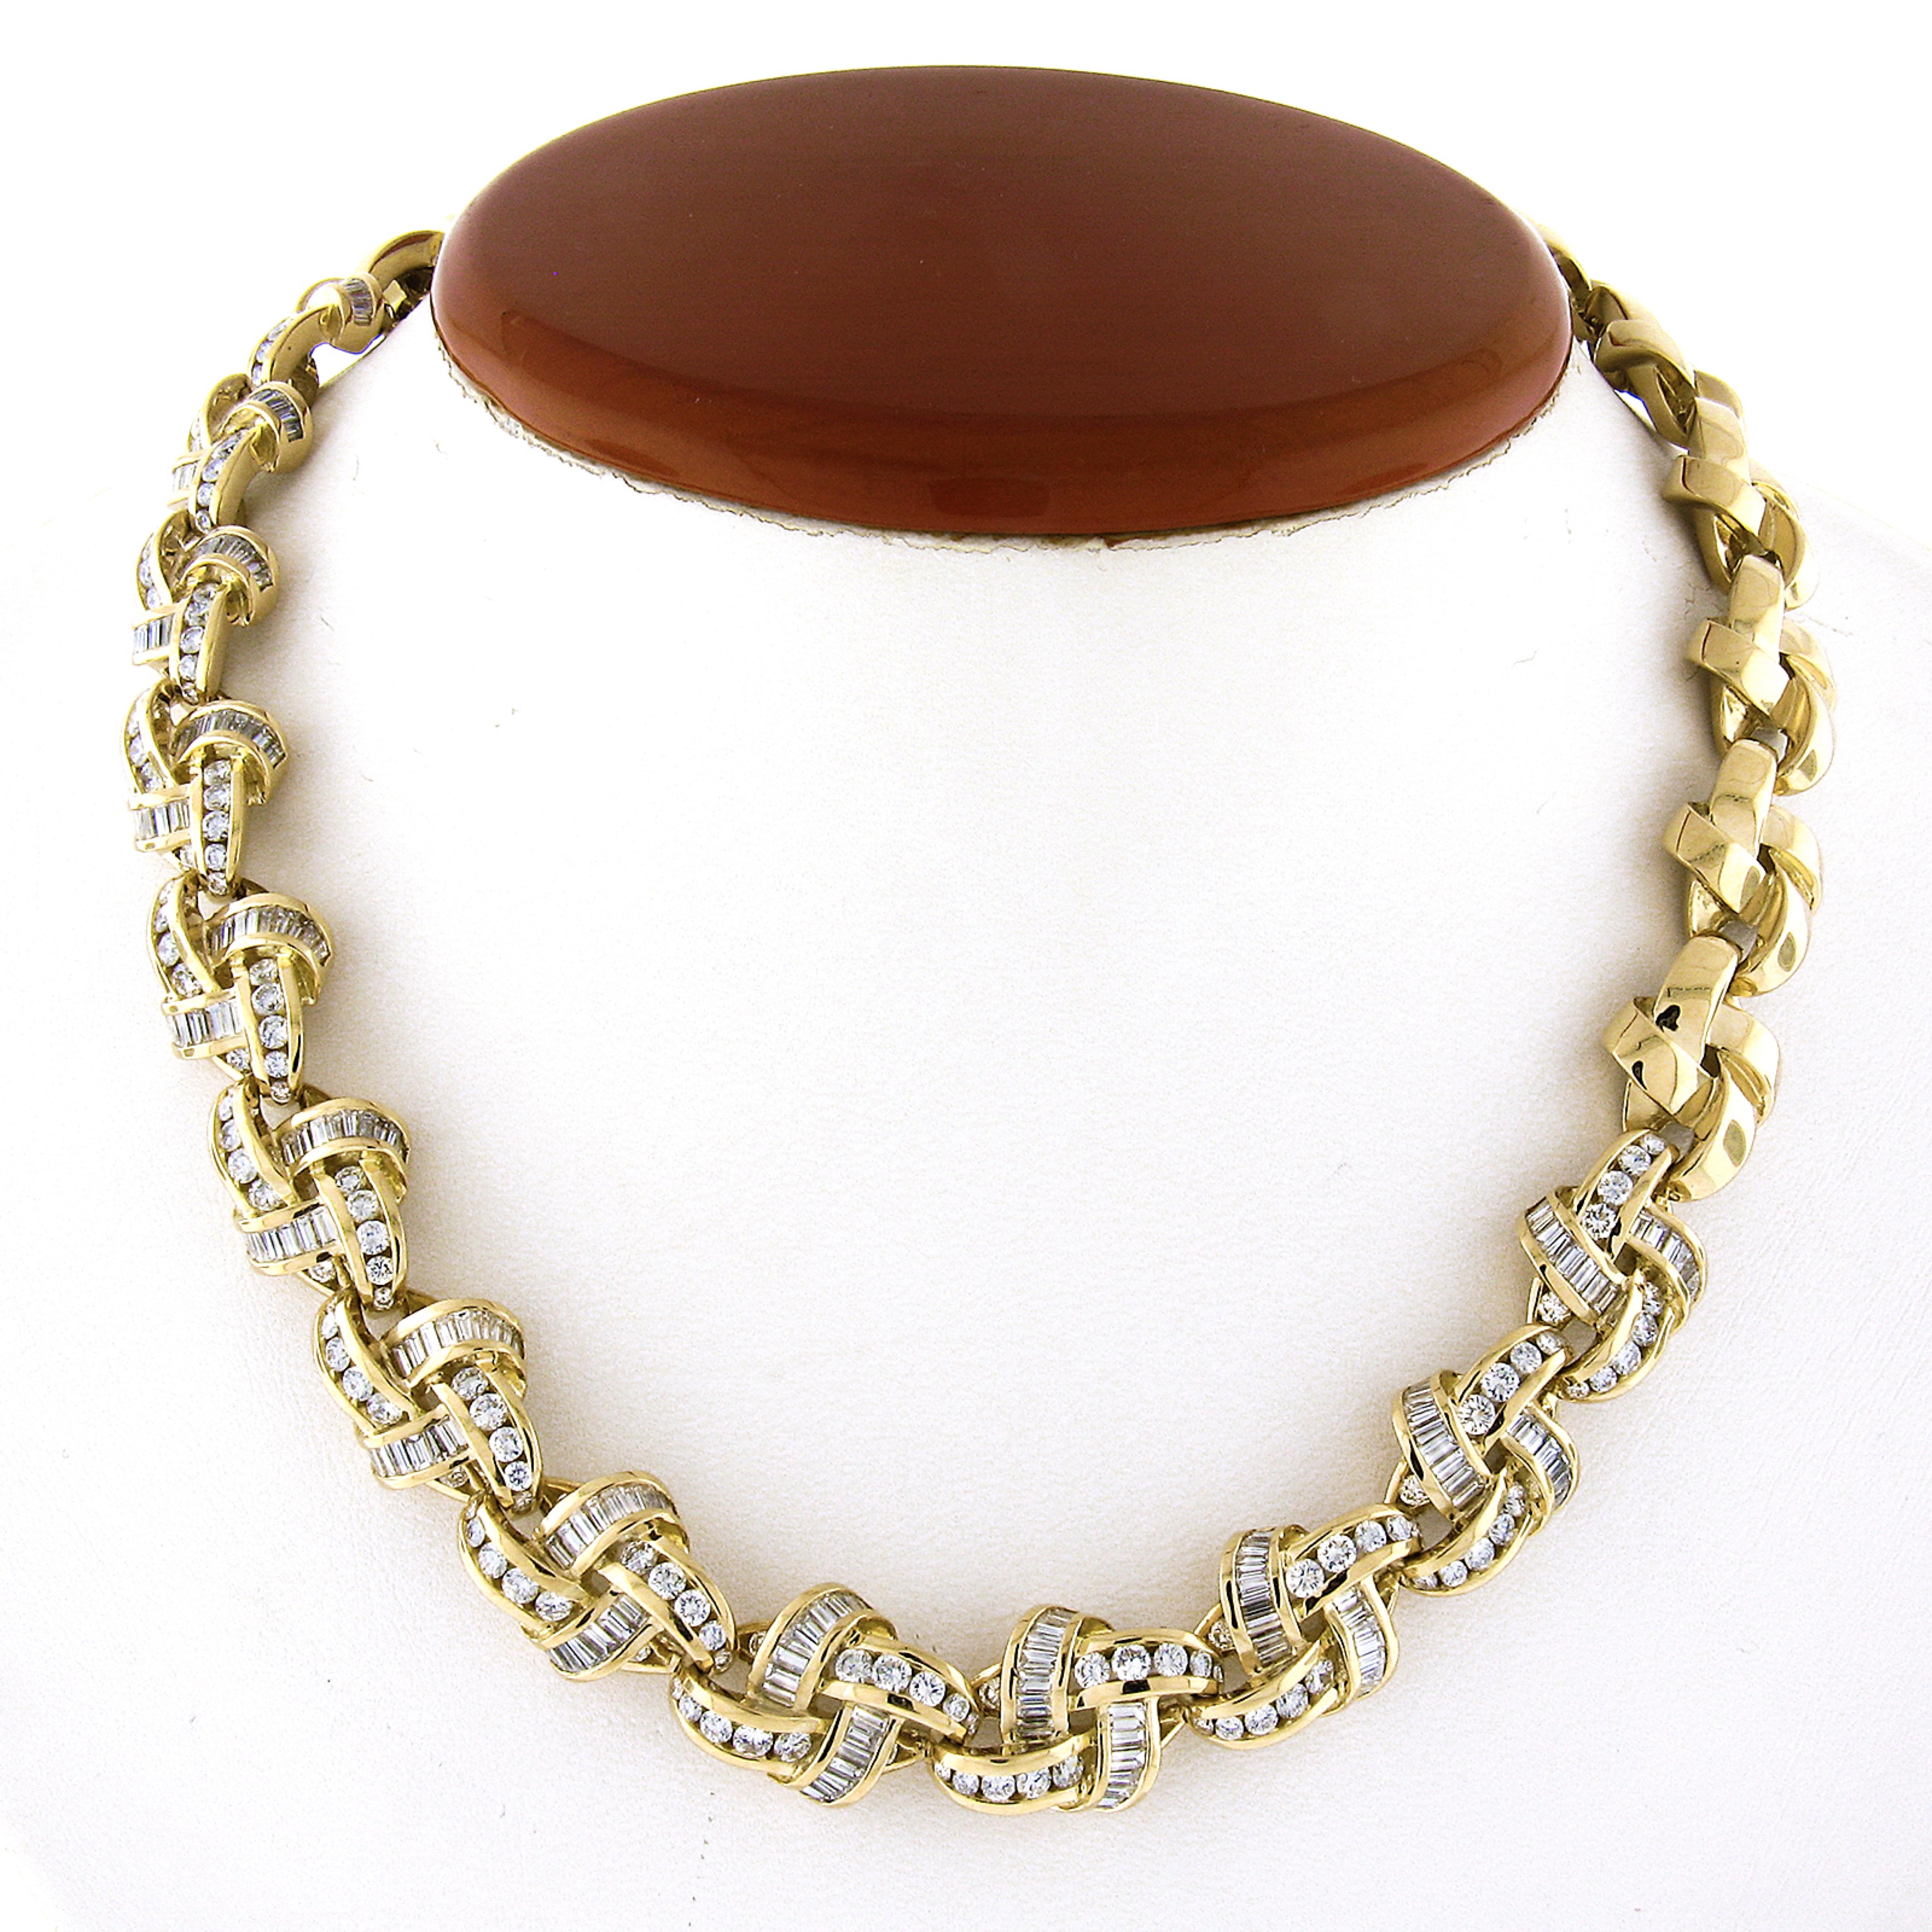 This Charles Krypell rare interlocking knot link statement chain necklace is crafted from solid 18k yellow gold. It features approximately 9 to 10 carats of the finest quality baguette & round brilliant cut diamonds that are all channel set in this